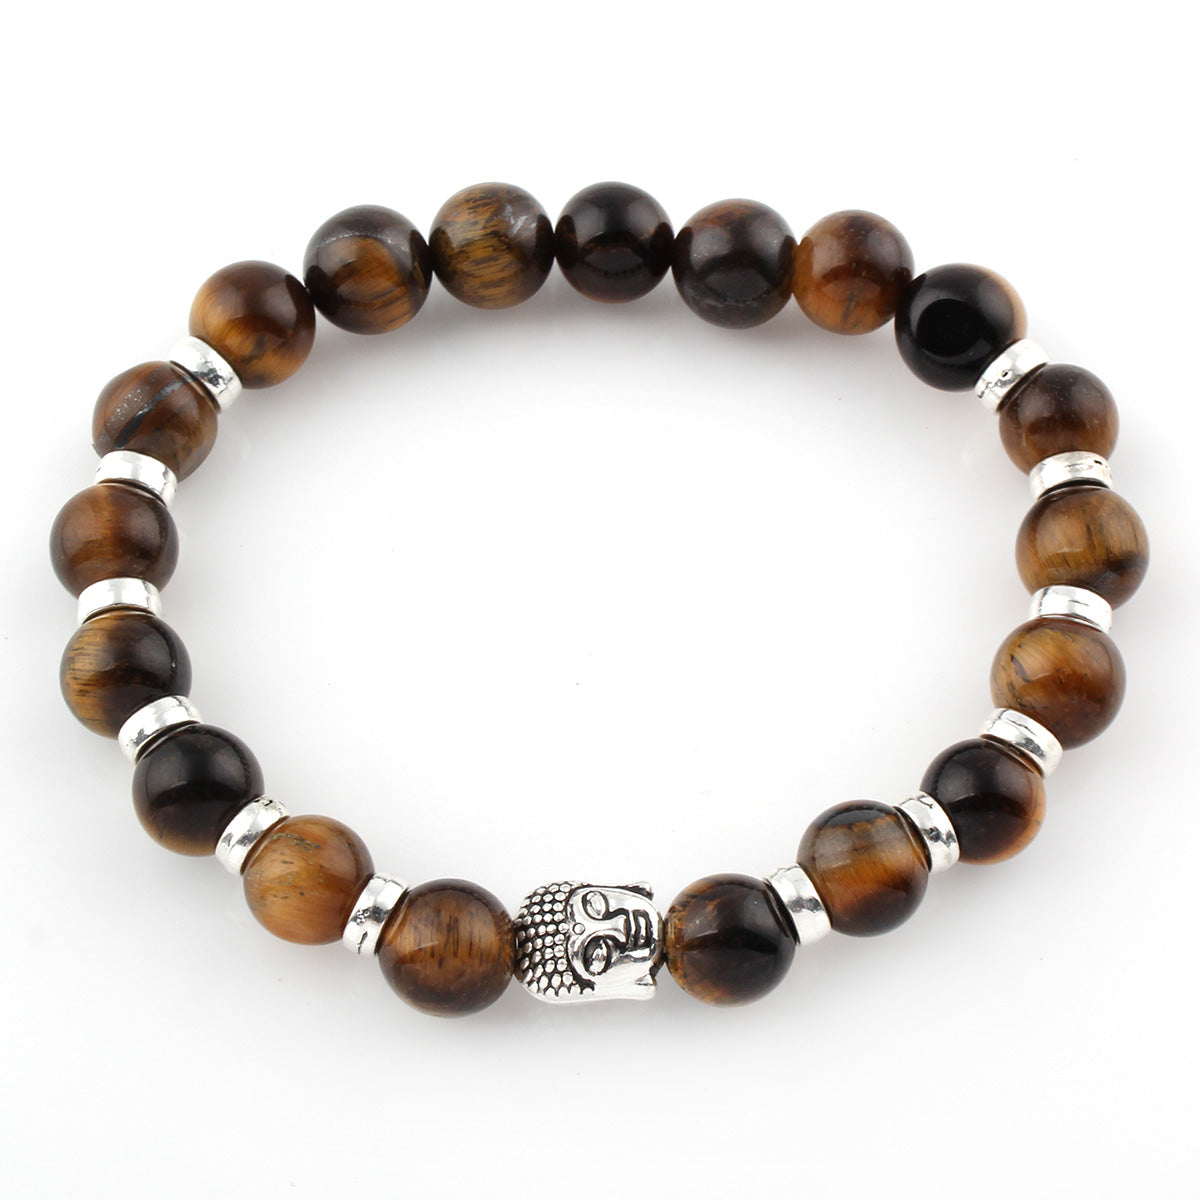 Tiger Eye with Buddha Wrist Mala Bracelet -  Antique Silver Color Plated - Natural & Buddhist jewelry - 8mm Approx. 7.9inch - China